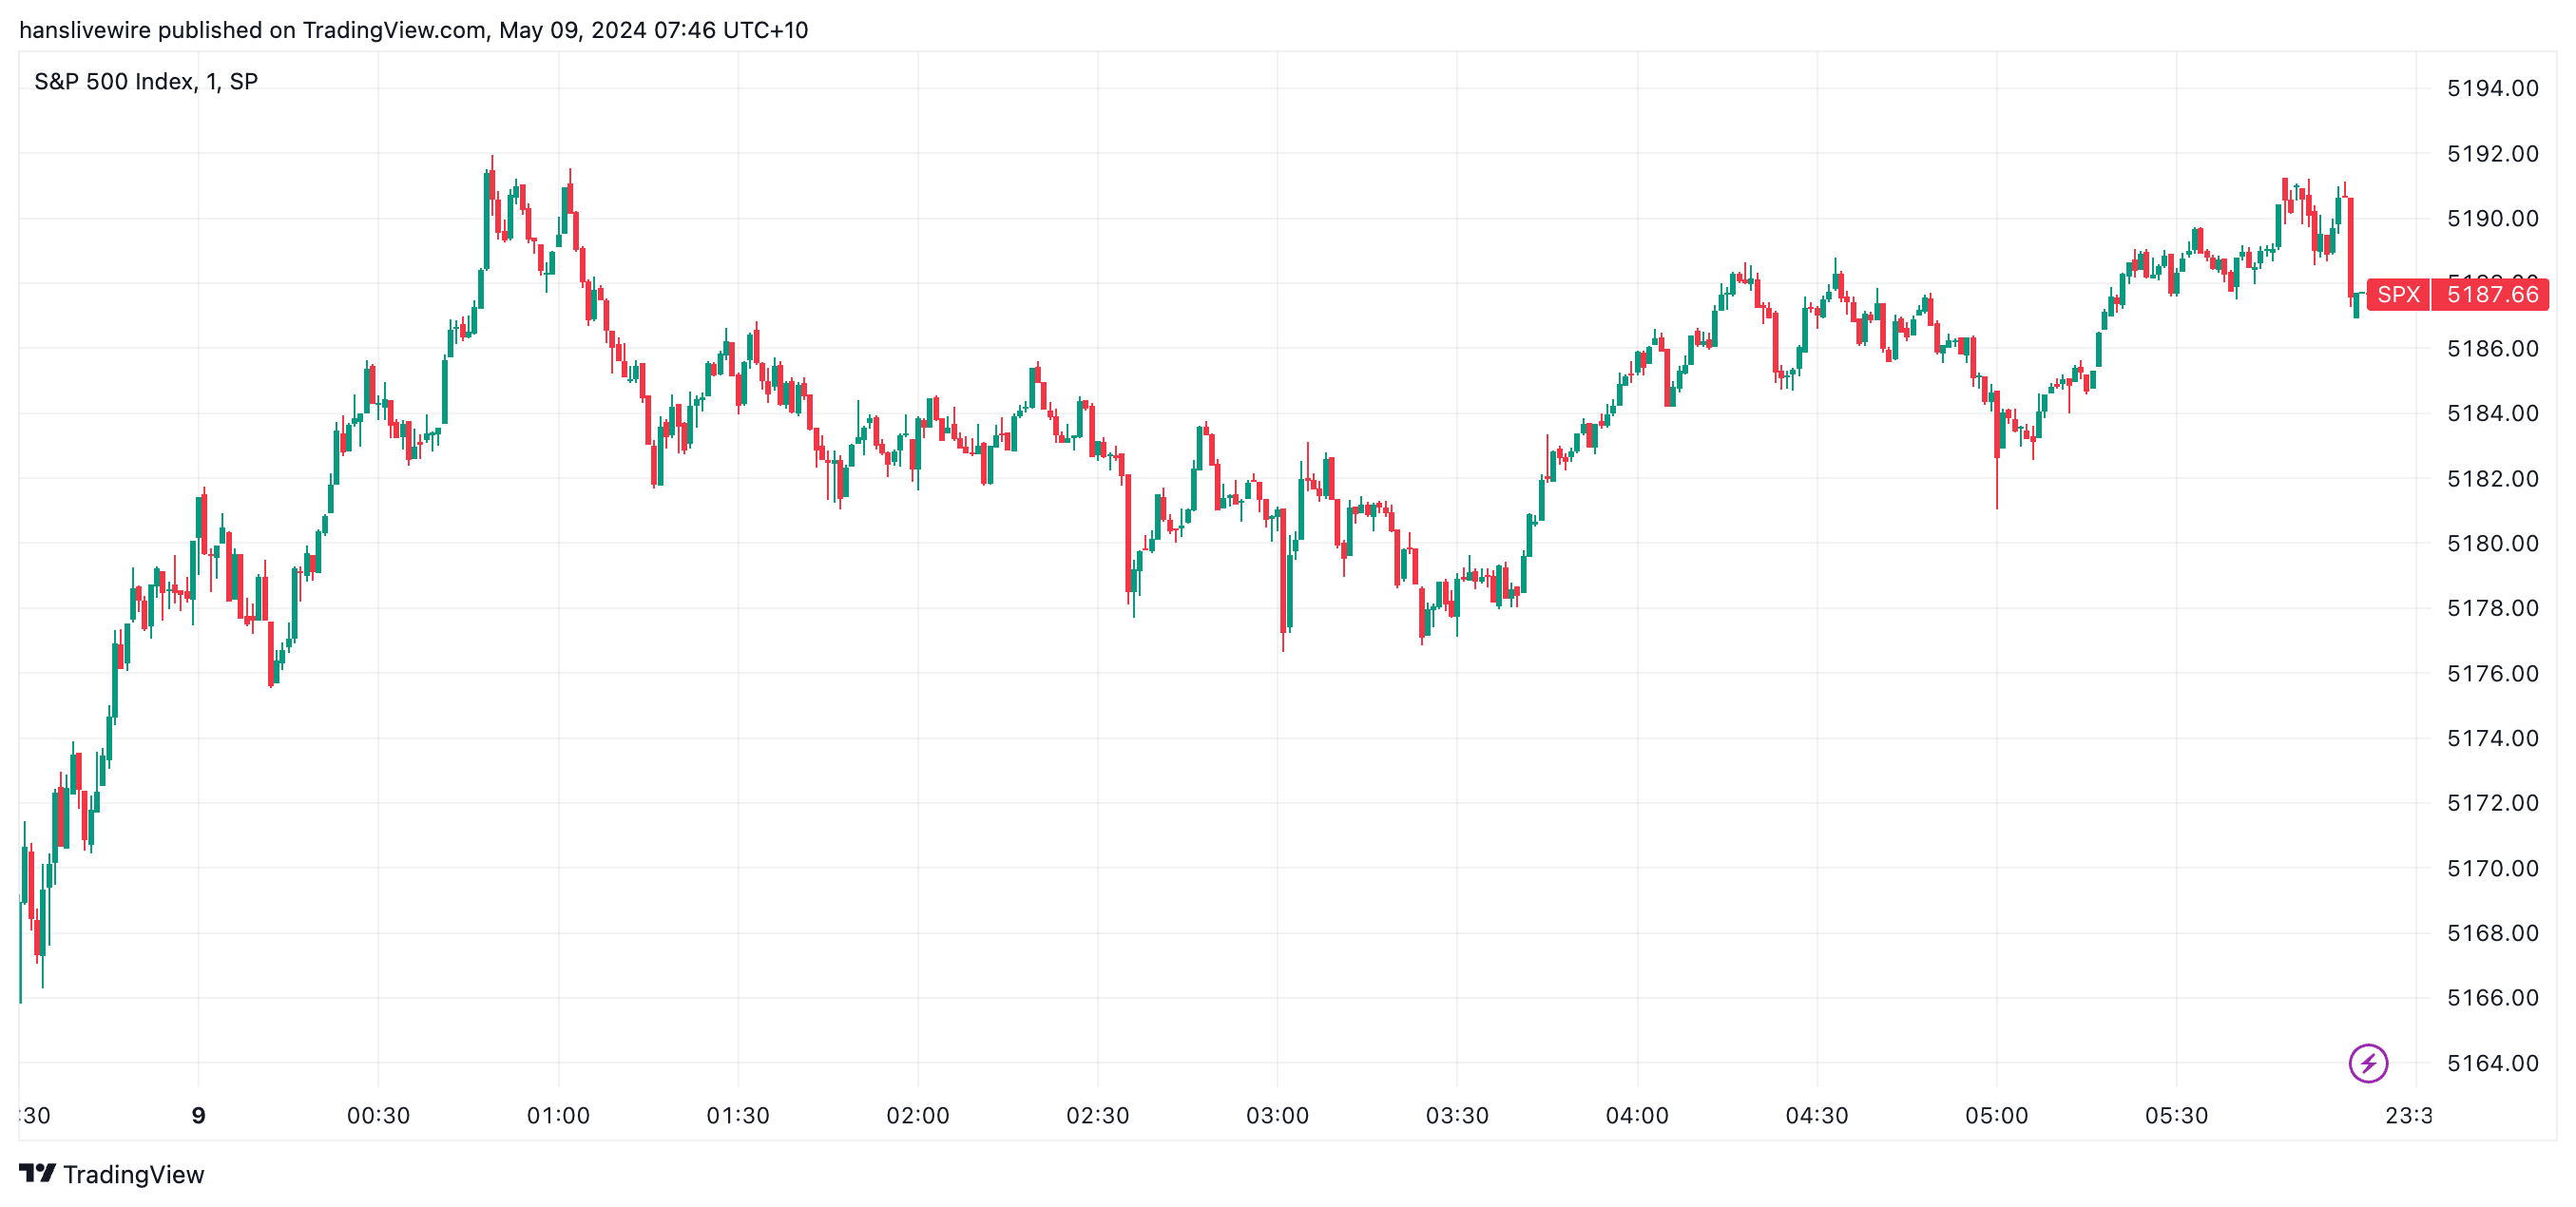 A choppy session leaves the S&P 500 essentially unchanged at the end of it all. (Source: TradingView)